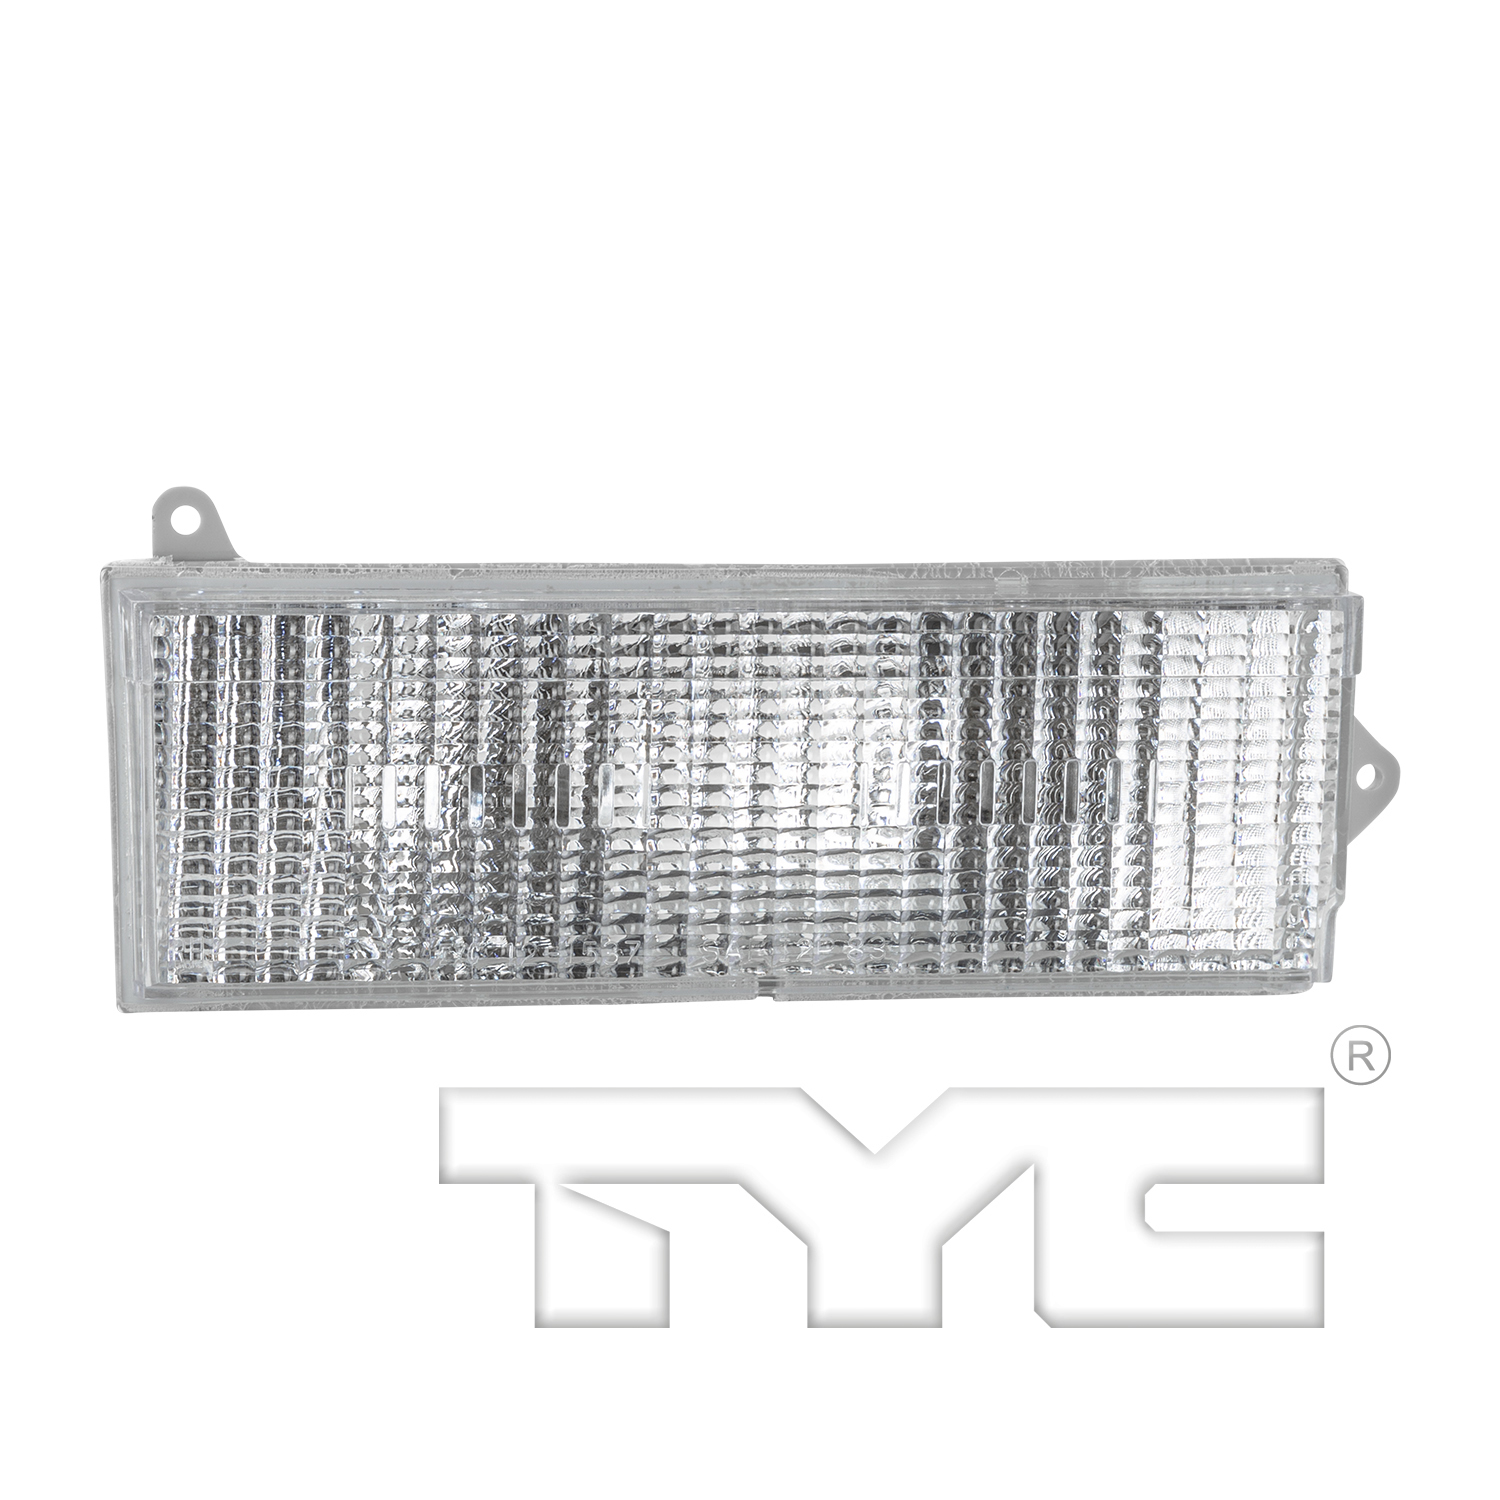 Aftermarket LAMPS for JEEP - WAGONEER, WAGONEER,84-90,RT Front signal lamp